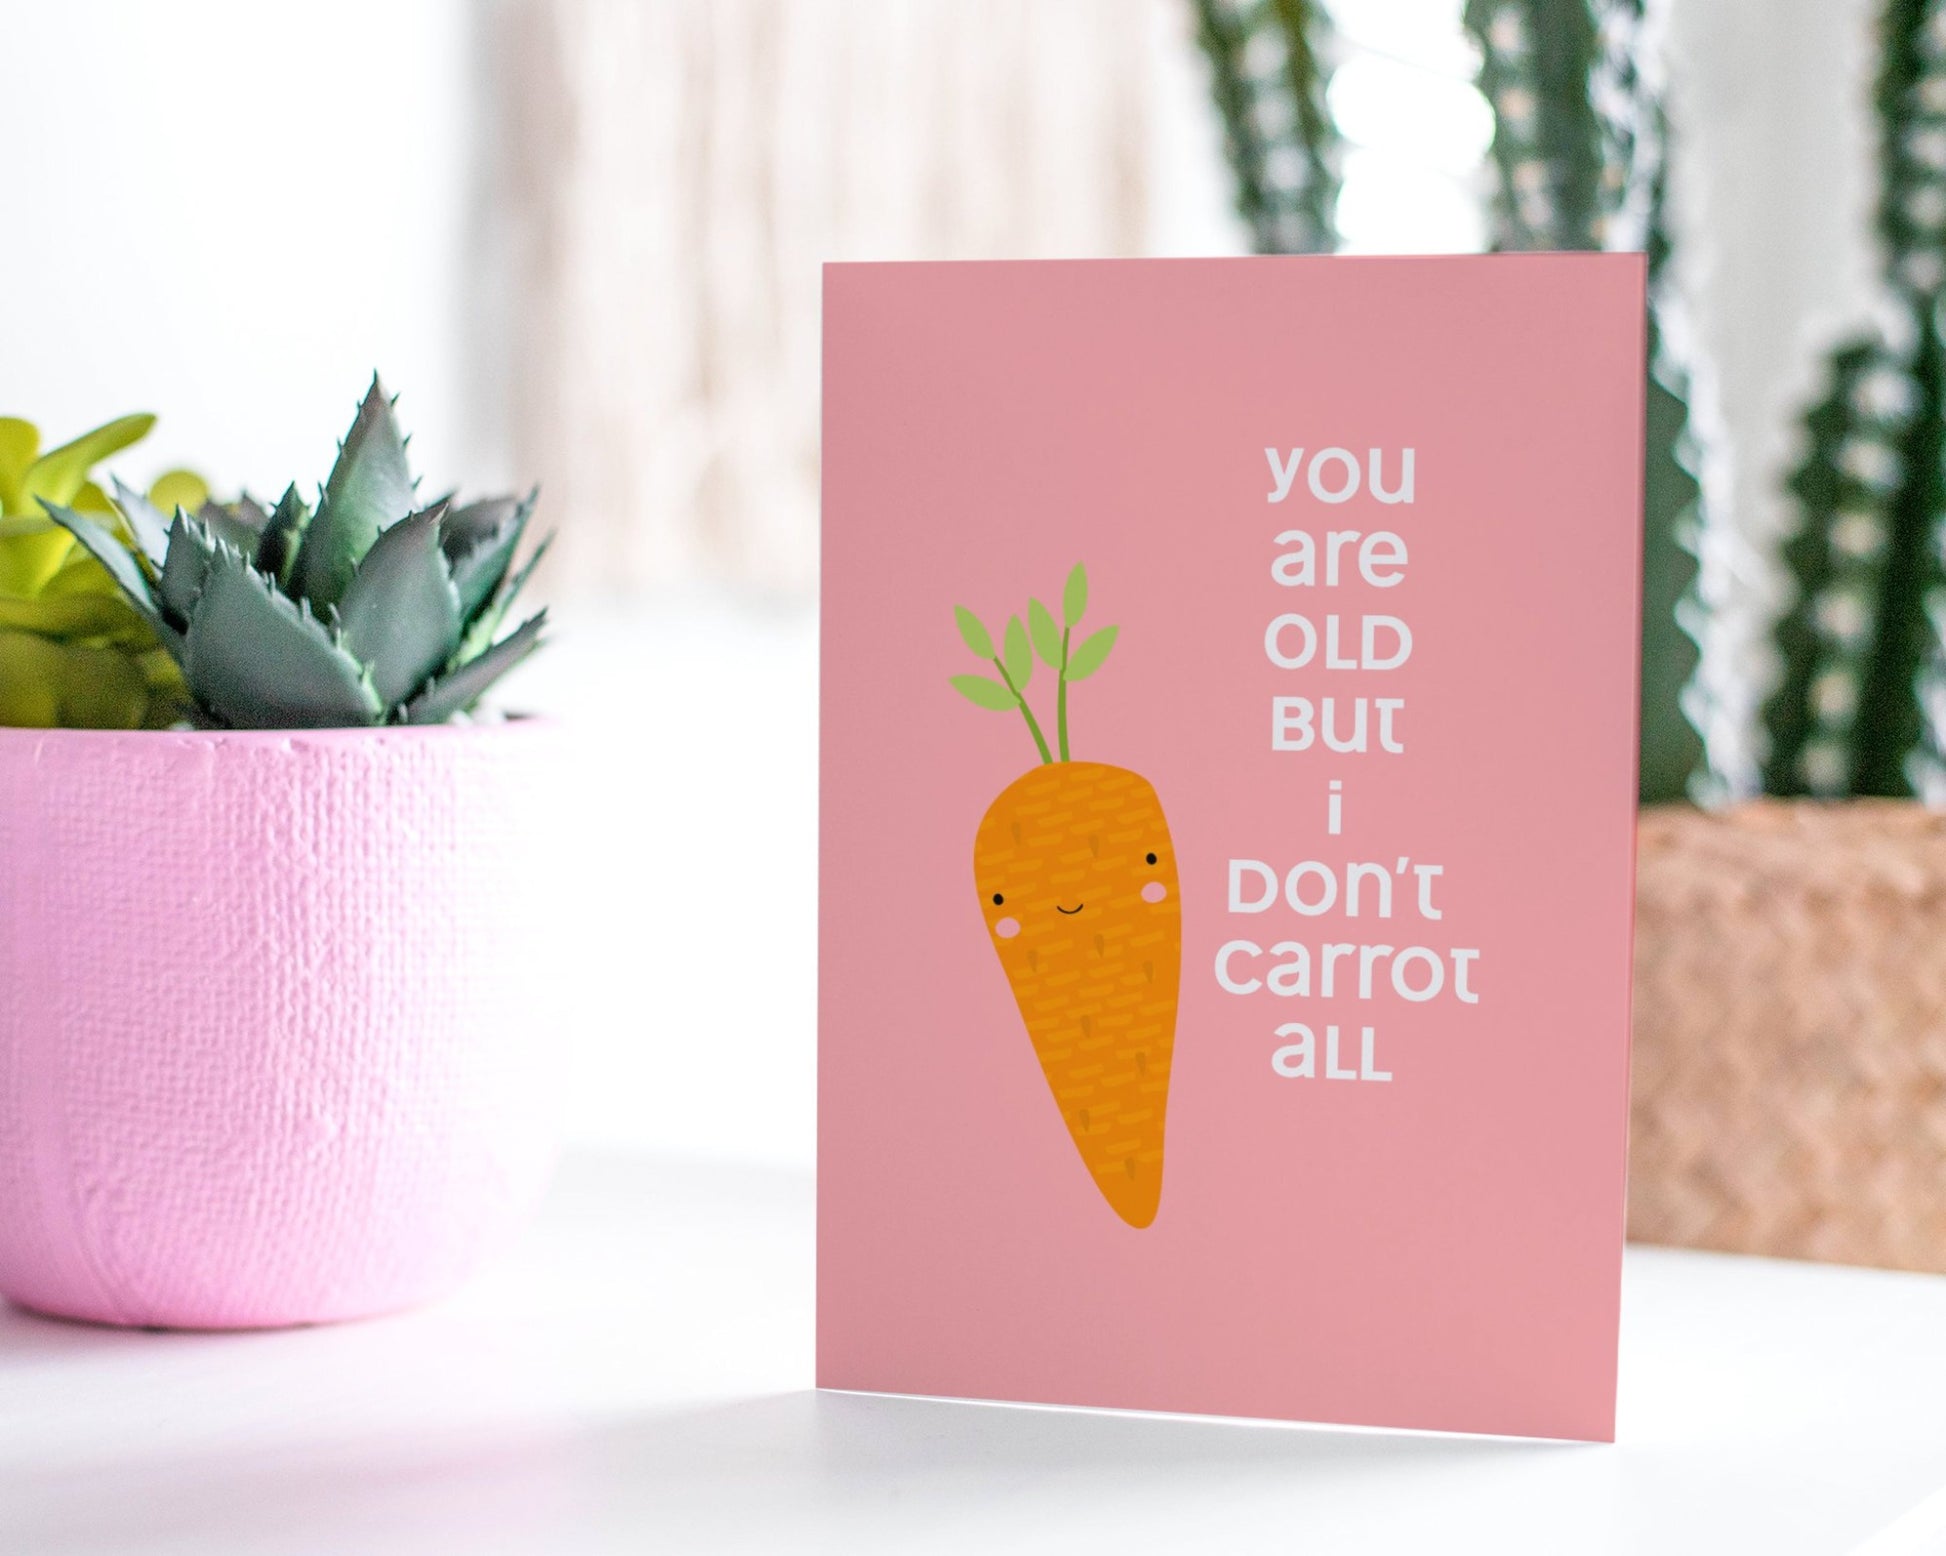 You Are Old But I Don't Carrot All - Funny Birthday Card For Everyone.